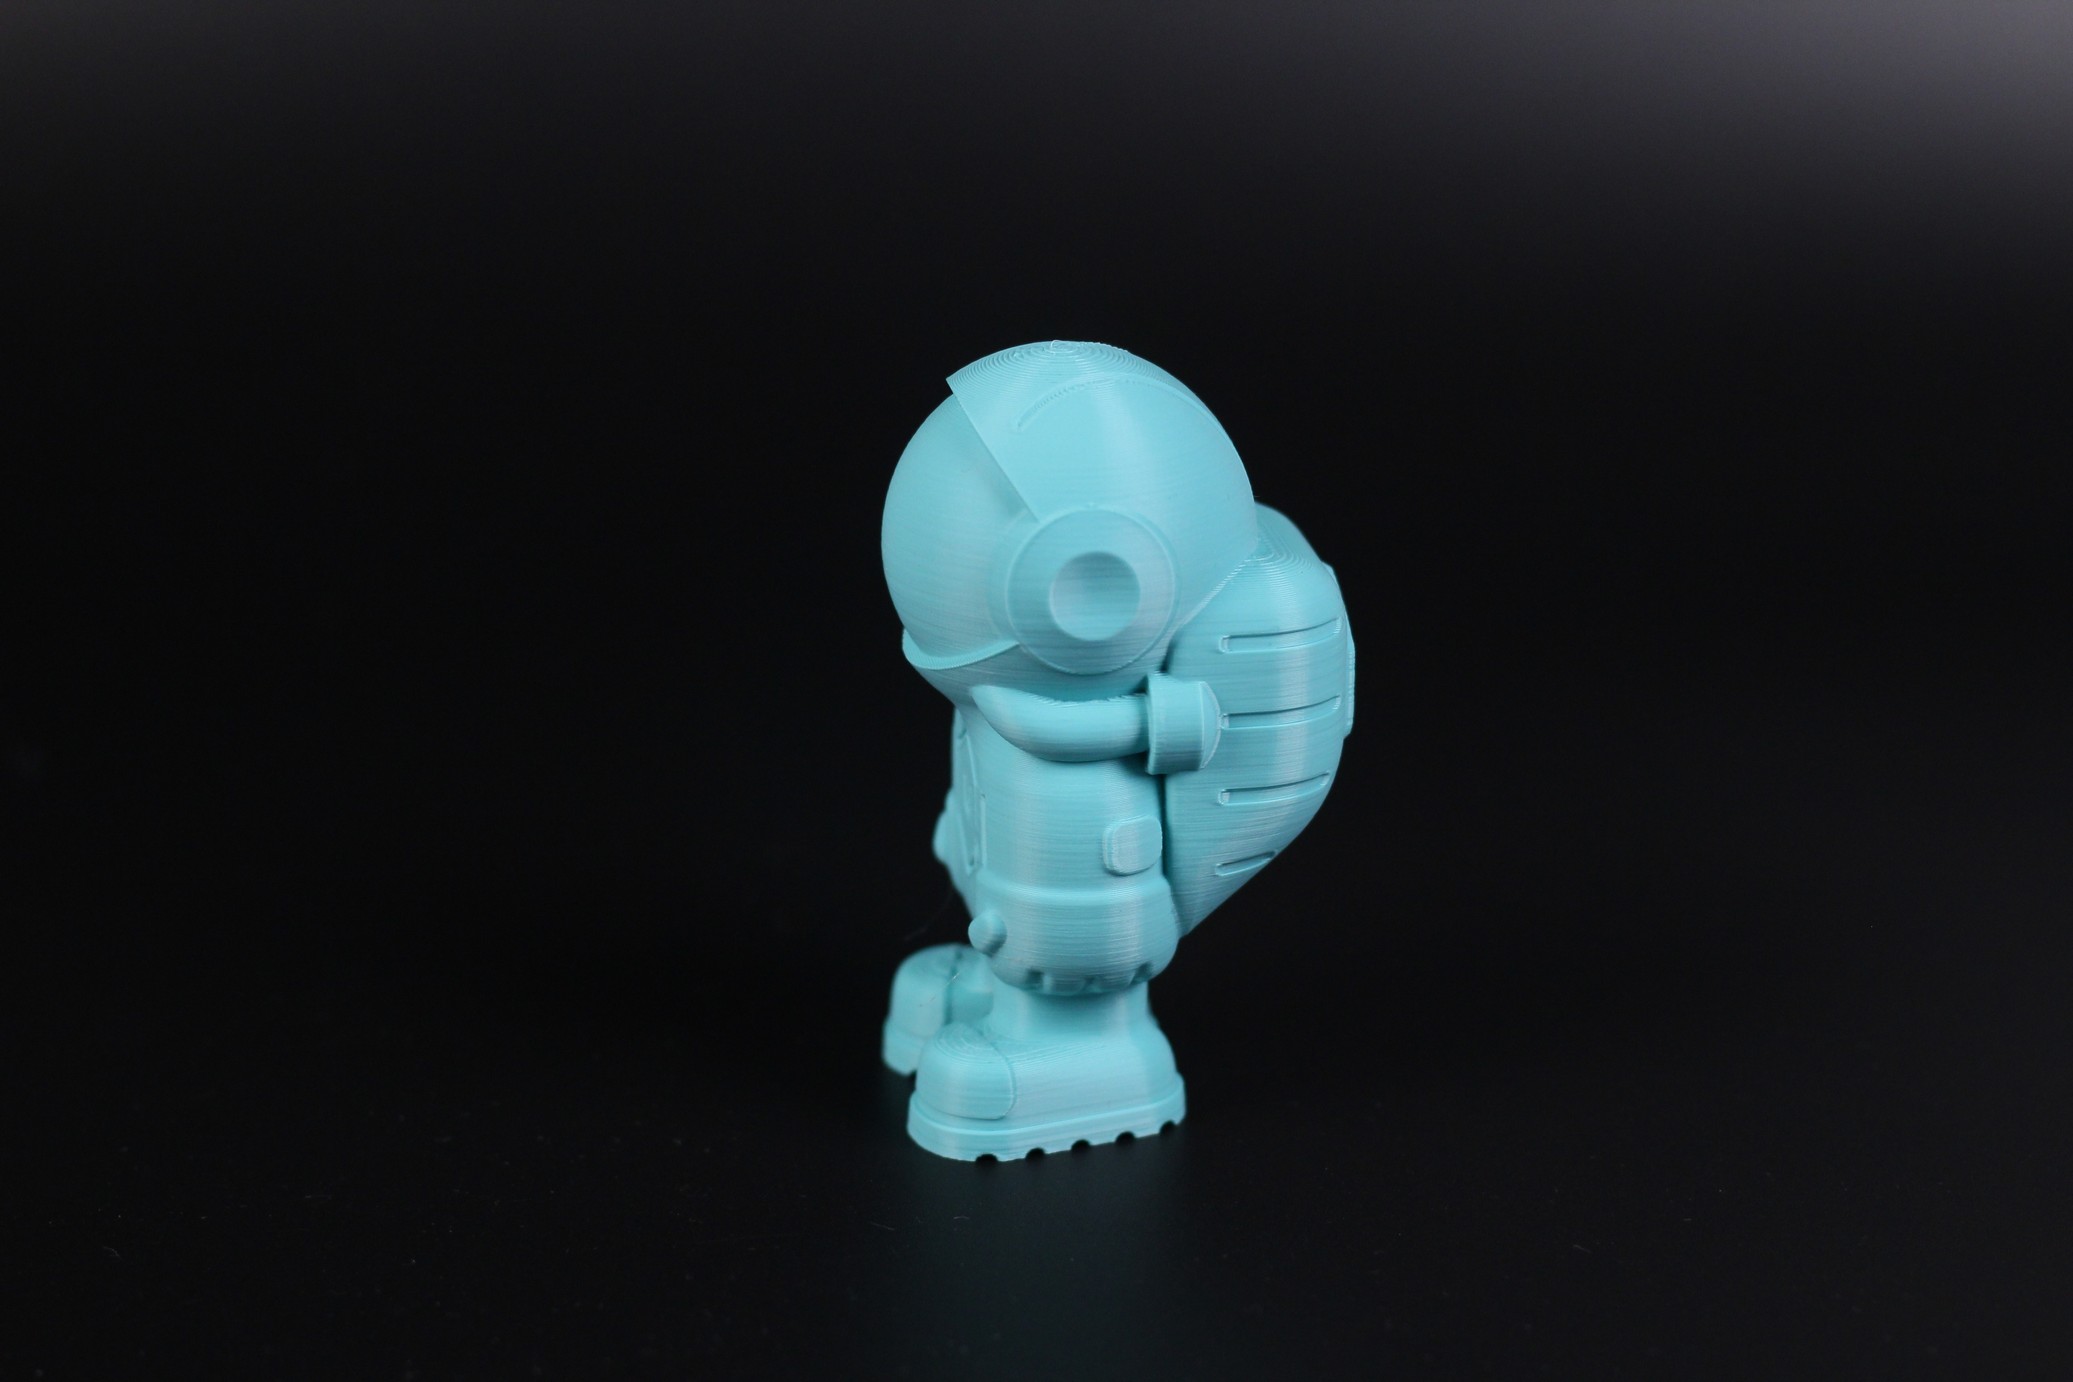 Phil A Ment printed on Anycubic Kobra Extrusion inconsistency 5 | Anycubic Kobra Review: The New Budget Standard